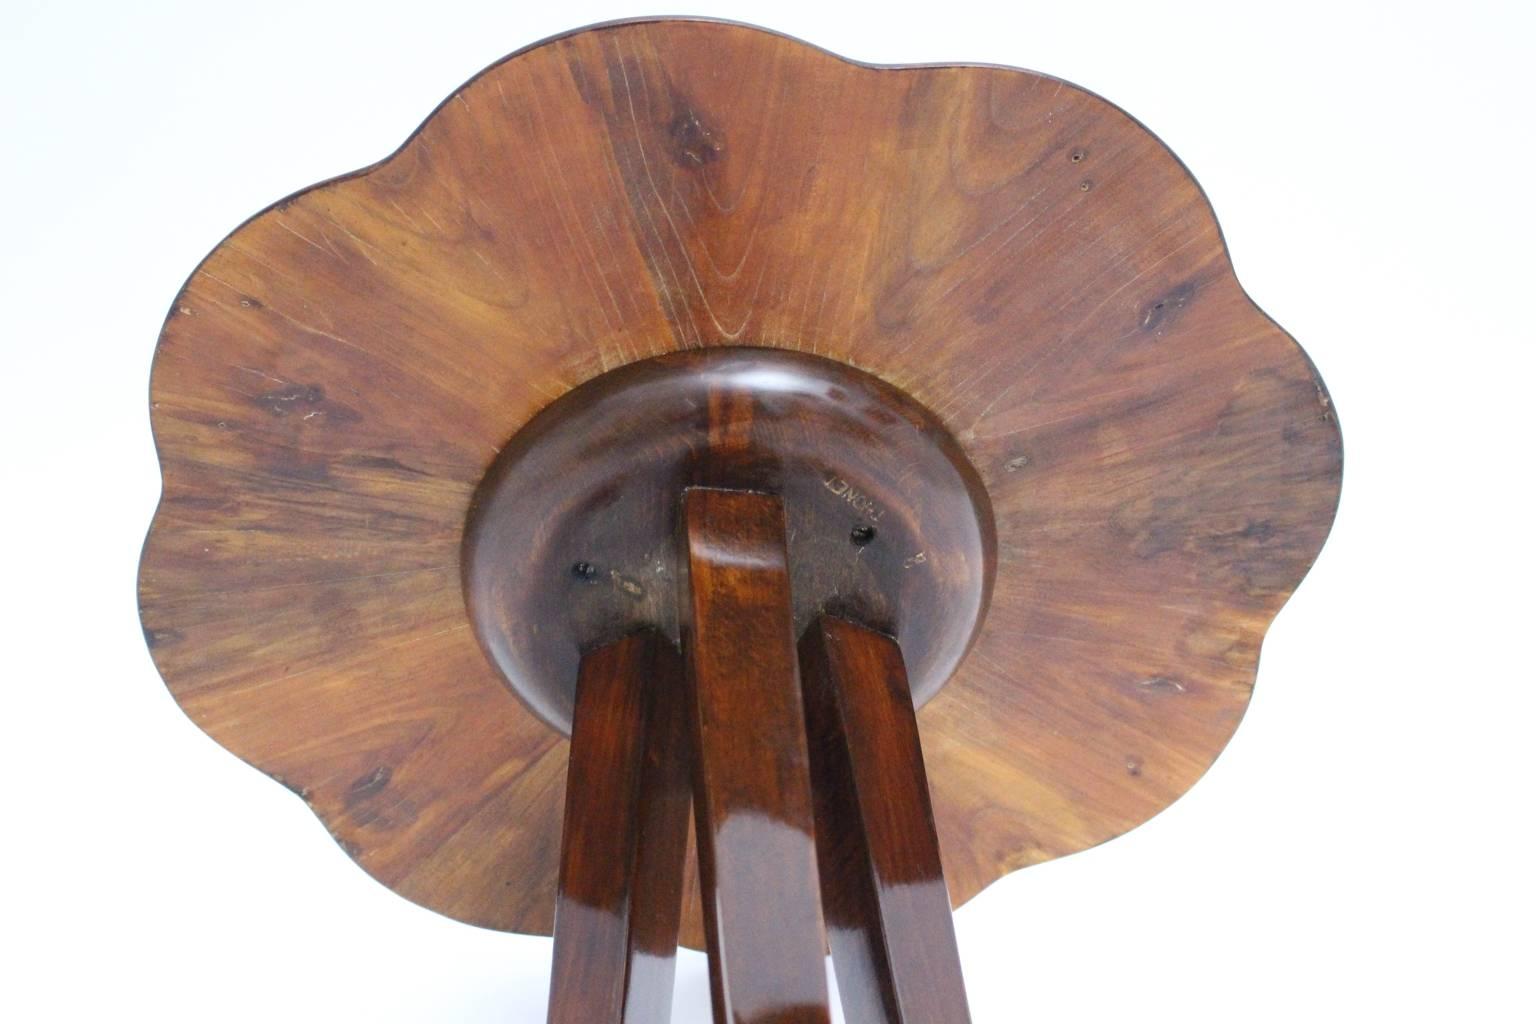 Art Deco Walnut Side Table or Coffee Table by Josef Frank for Thonet, circa 1925 For Sale 1